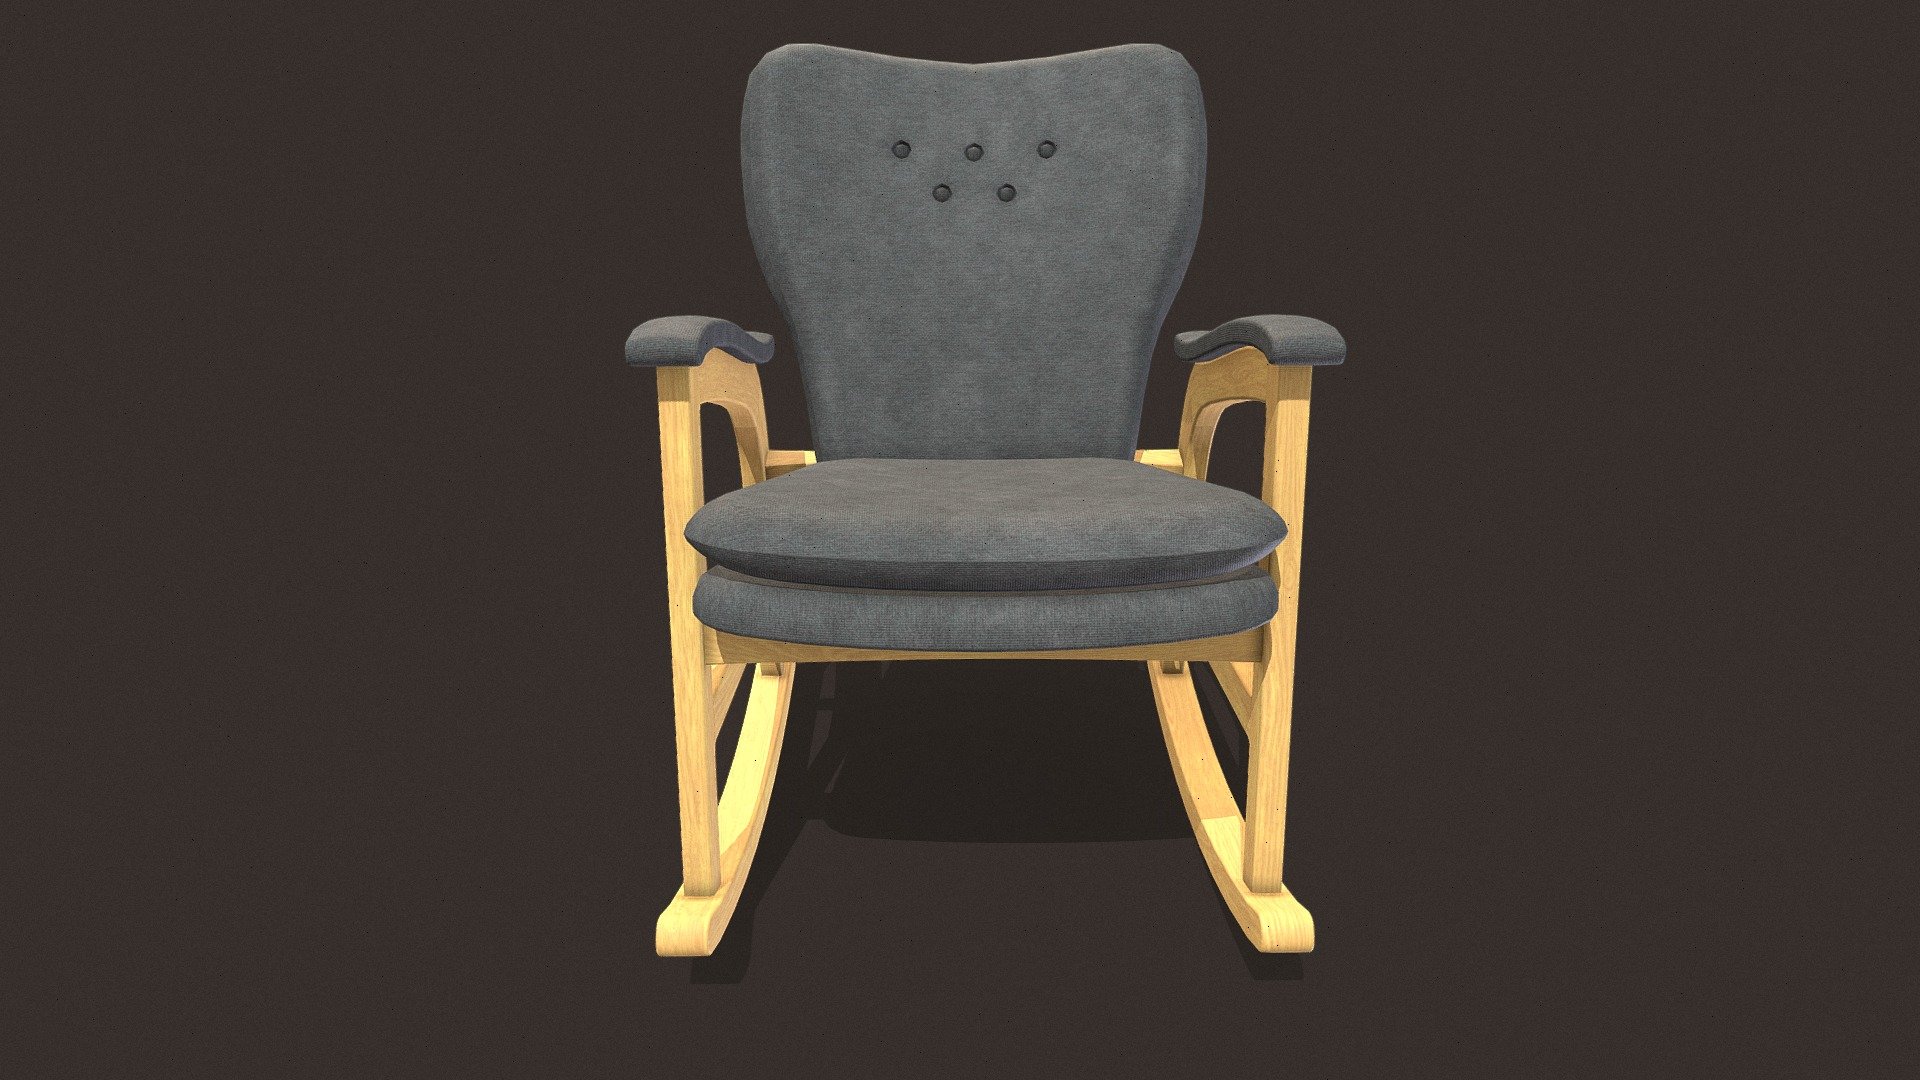 Rocking chair is a model that will enhance detail and realism to any of your rendering projects. The model has a fully textured, detailed design that allows for close-up renders, and was originally modeled in Blender 3.5, Textured in Substance Painter 2023 and rendered with Adobe Stagier Renders have no post-processing.

Features: -High-quality polygonal model, correctly scaled for an accurate representation of the original object. -The model’s resolutions are optimized for polygon efficiency. -The model is fully textured with all materials applied. -All textures and materials are included and mapped in every format. -No cleaning up necessary just drop your models into the scene and start rendering. -No special plugin needed to open scene.

Measurements: Units: M

File Formats: OBJ FBX

Textures Formats: PNG 4k - Rocking chair 10 - Buy Royalty Free 3D model by MDgraphicLAB 3d model